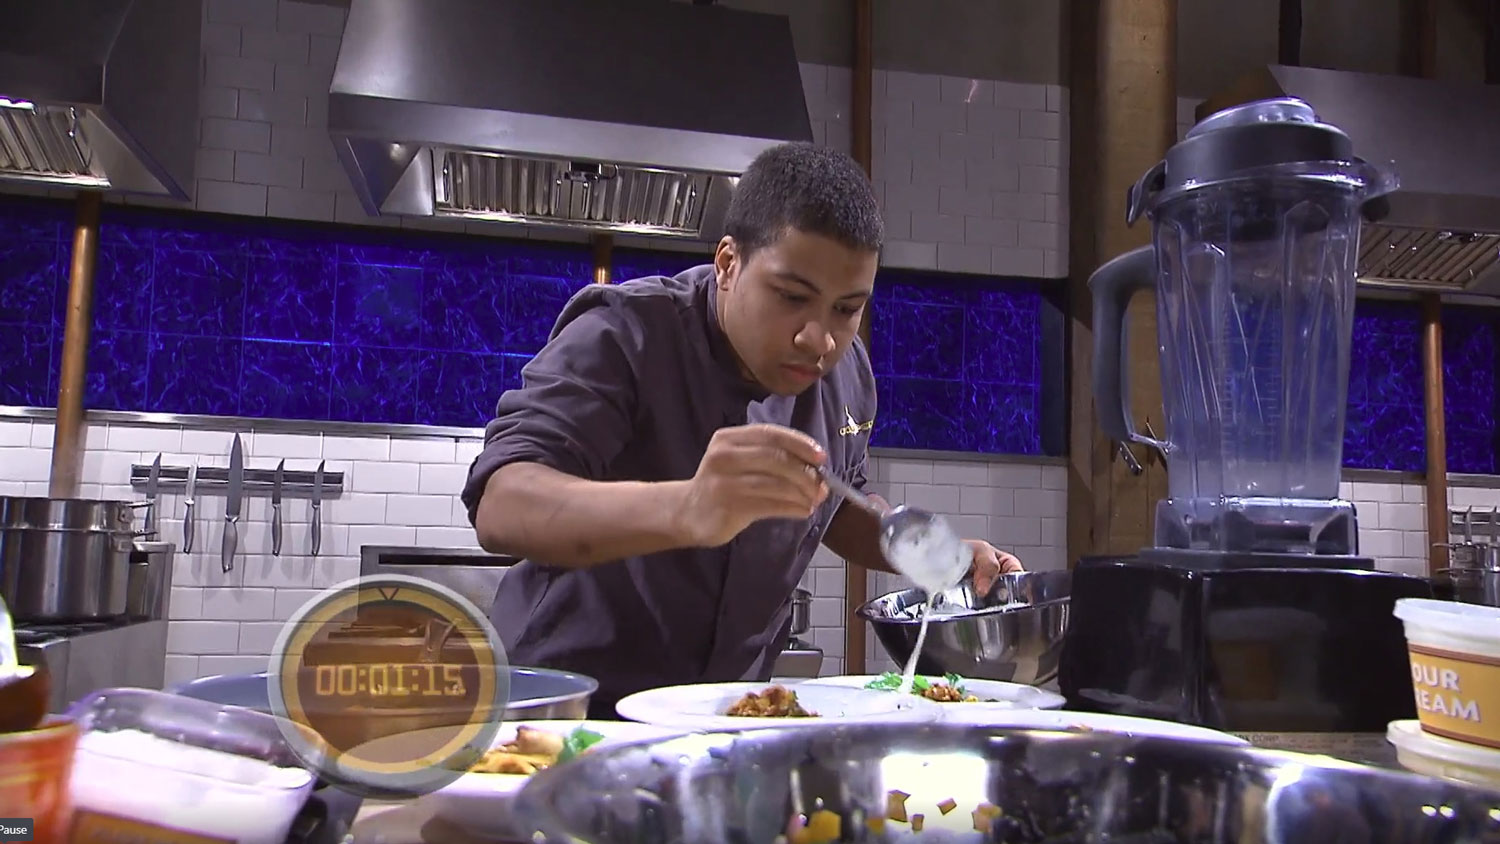 Sakari Smithwick ’16 excels on the cooking show